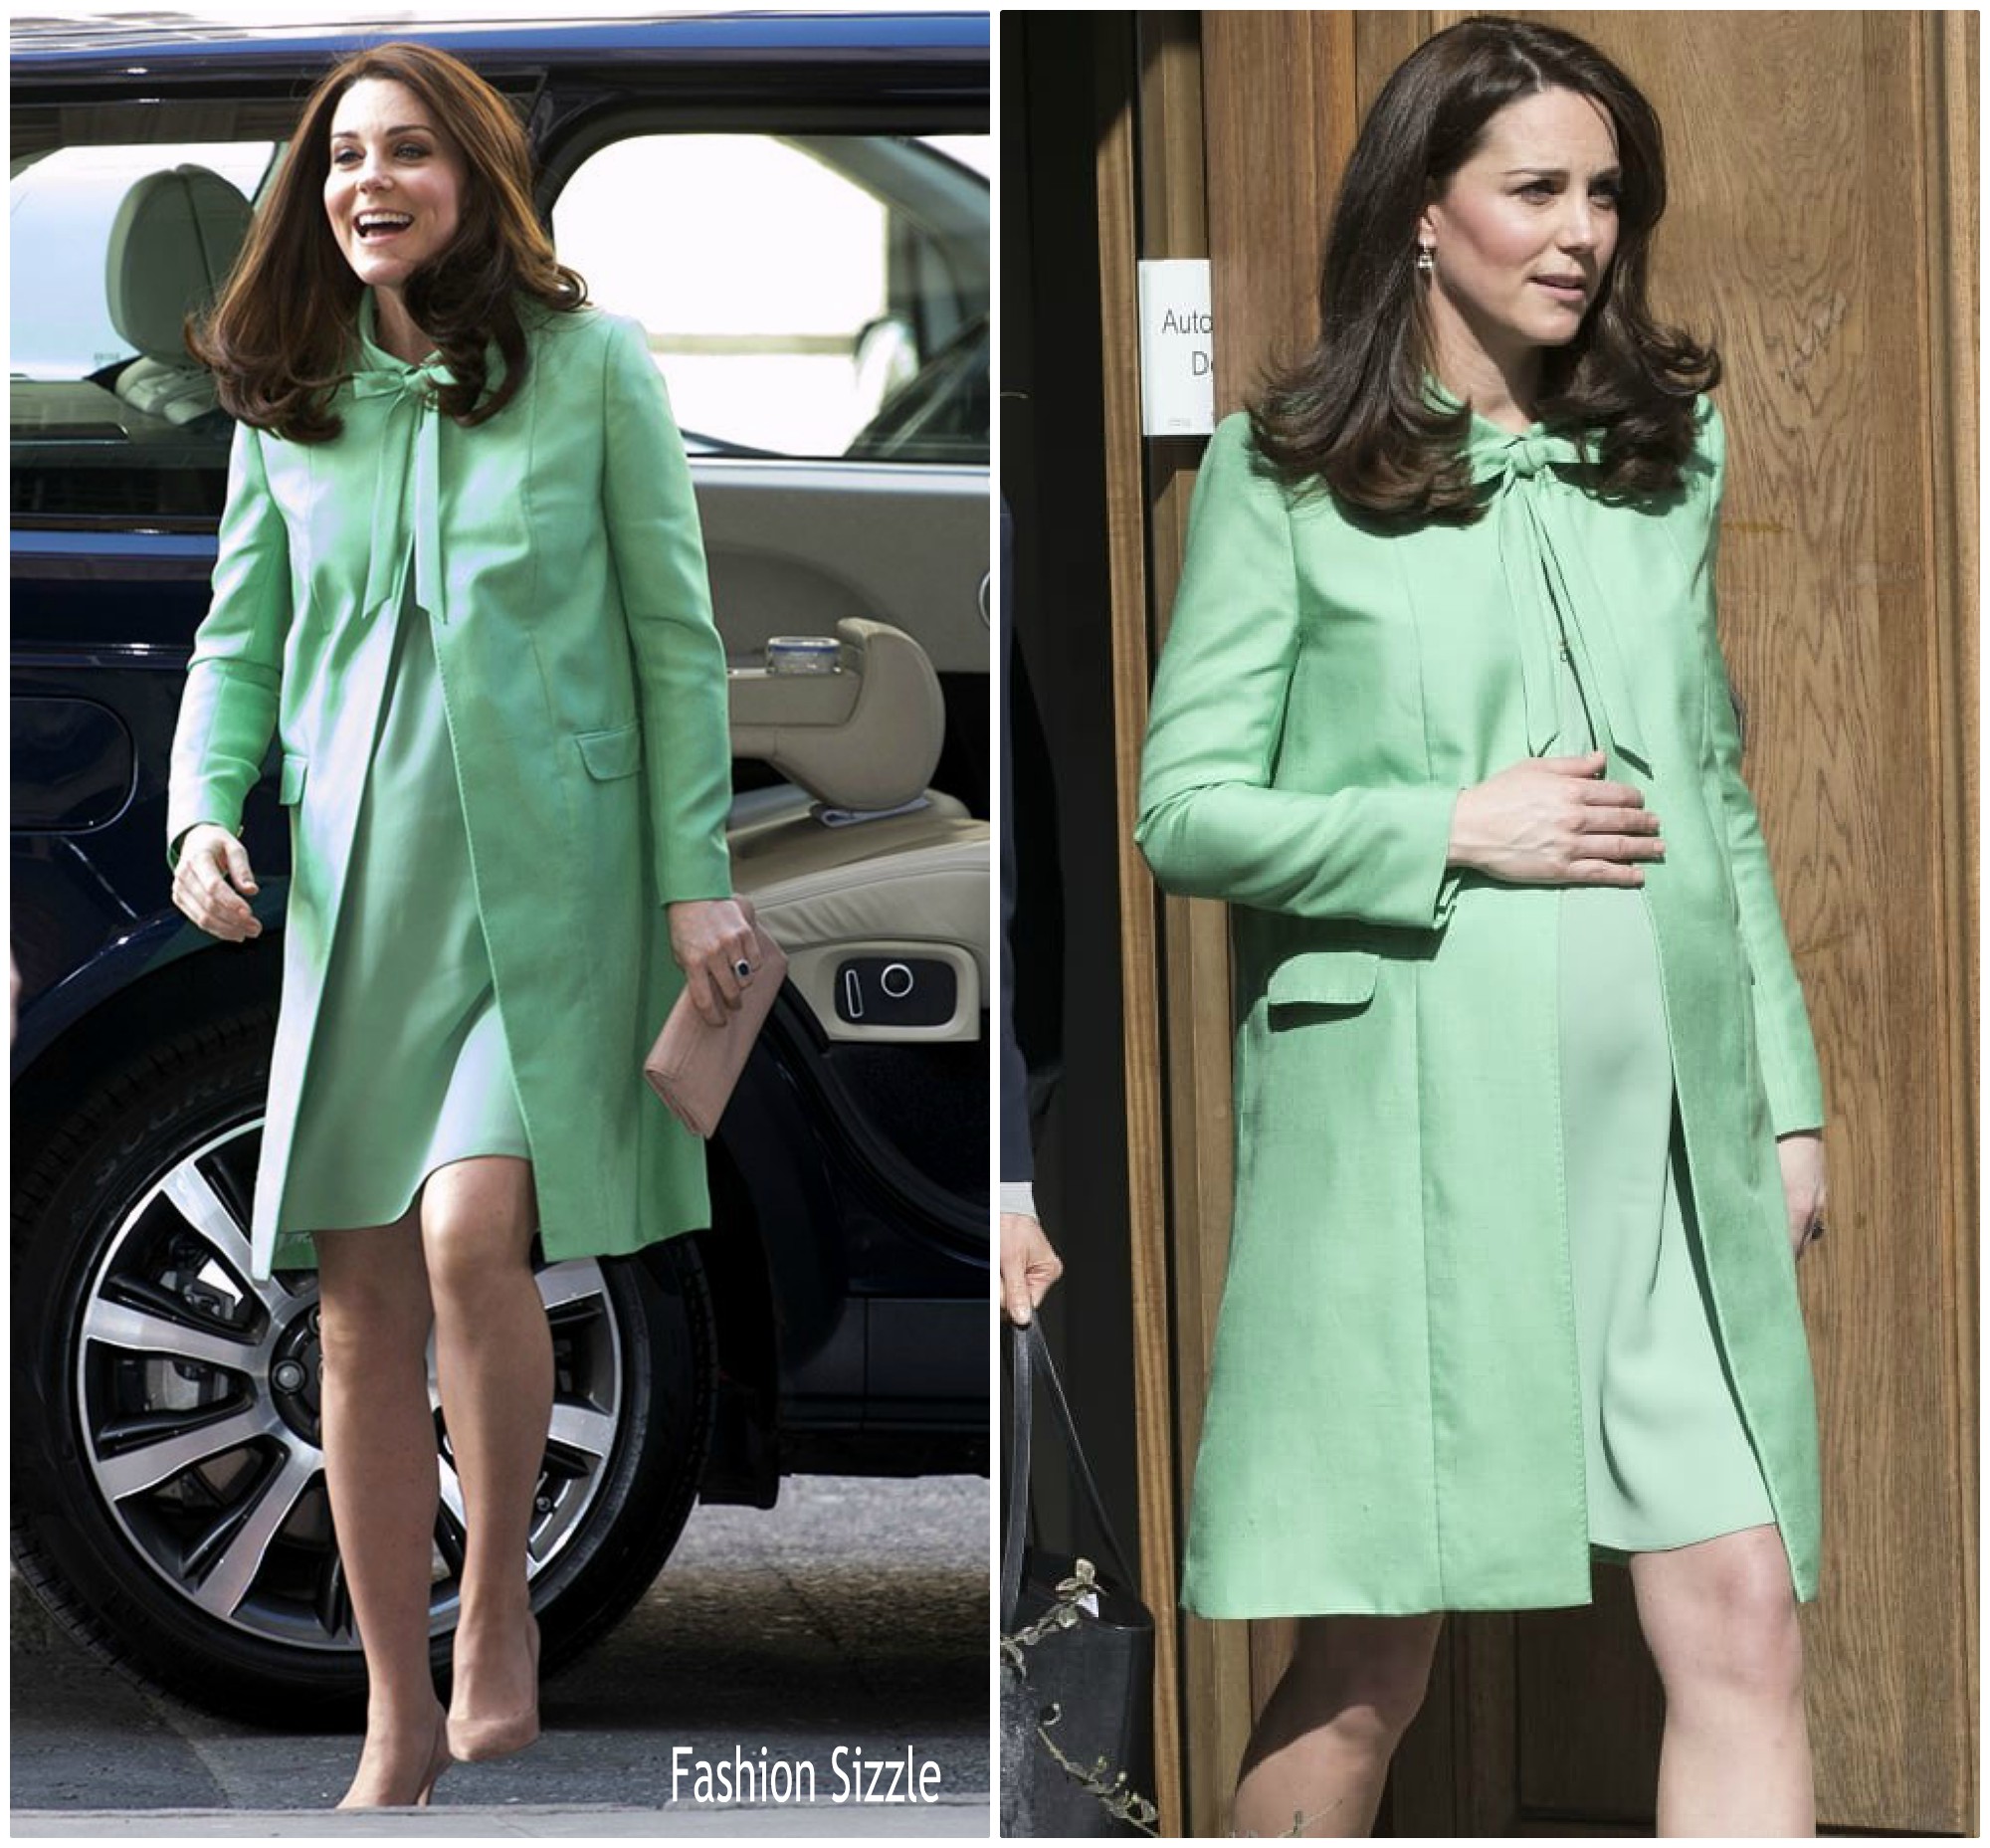 catherine-duchess-of-cambridge-in-jenny-packman-early-intervention-for-children-and-families-symposium